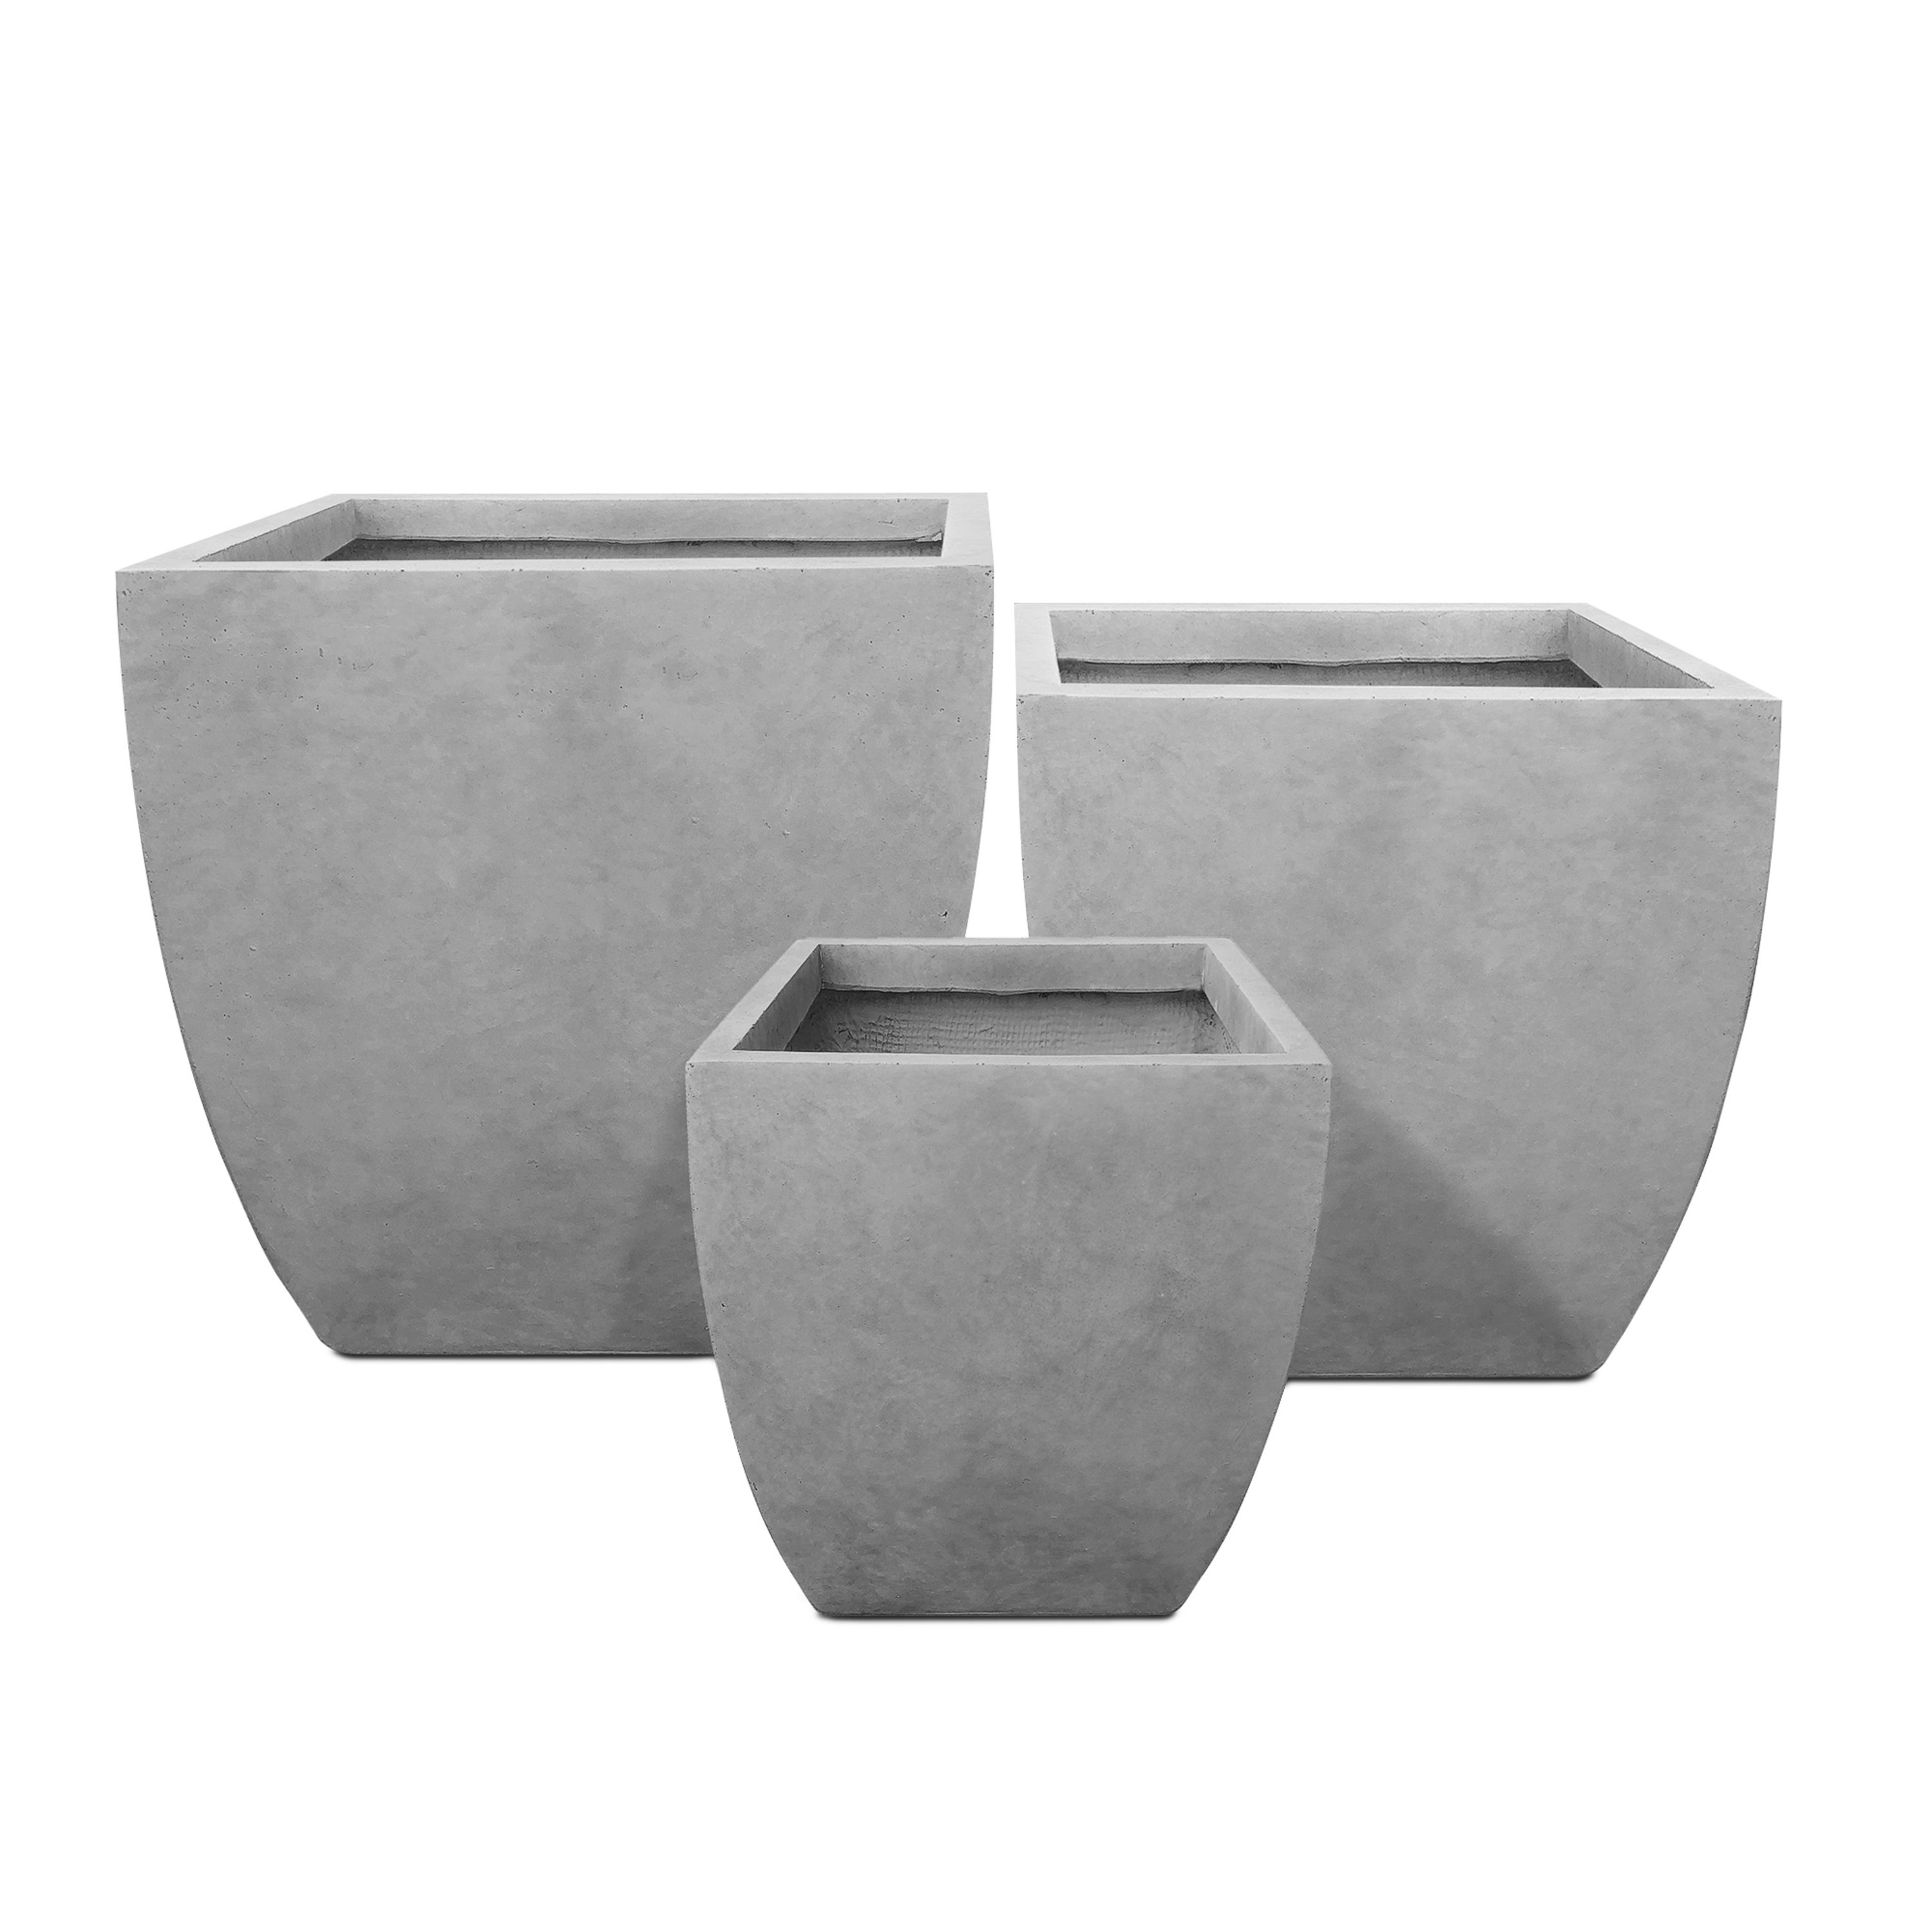 https://assets.wfcdn.com/im/19384407/compr-r85/2094/209487919/kante-3-piece-square-natural-finish-lightweight-concrete-and-weather-resistant-fiberglass-indoor-outdoor-planters-with-drainage-holes-large-1772x1772-in-medium-1496x1496-in-small-1063x1063-in-set.jpg